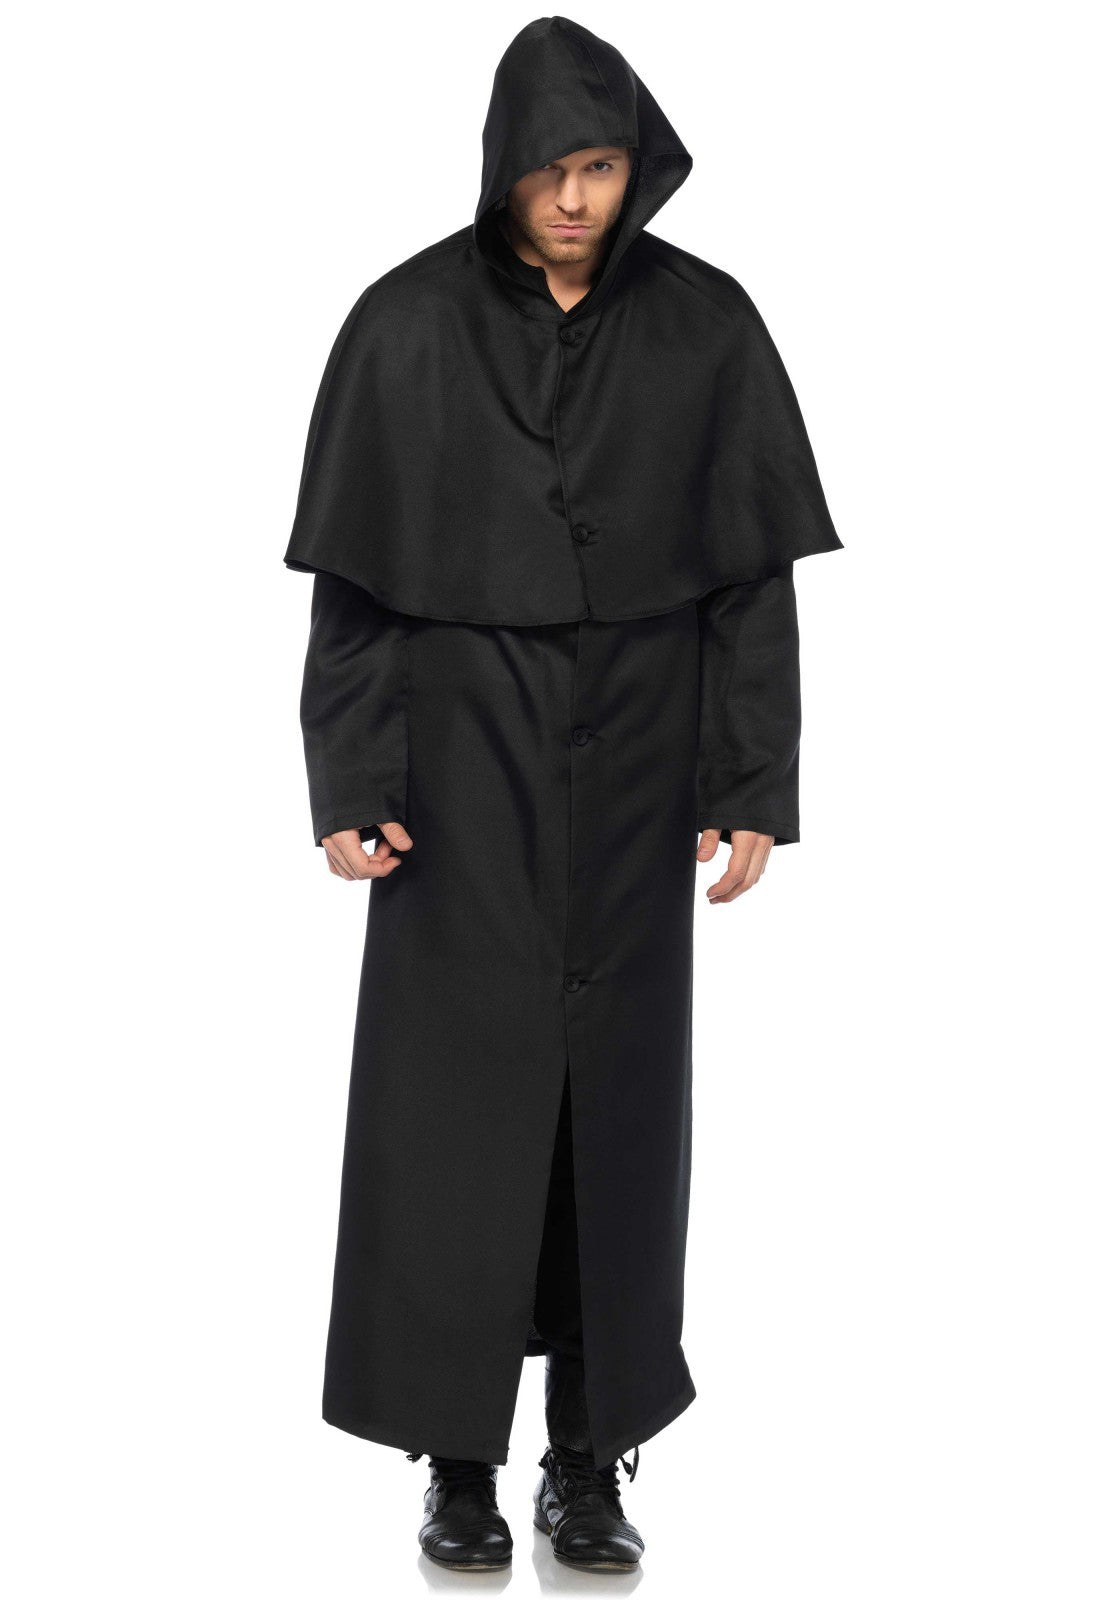 HOODED BUTTON FRONT CLOAK
-BLACK